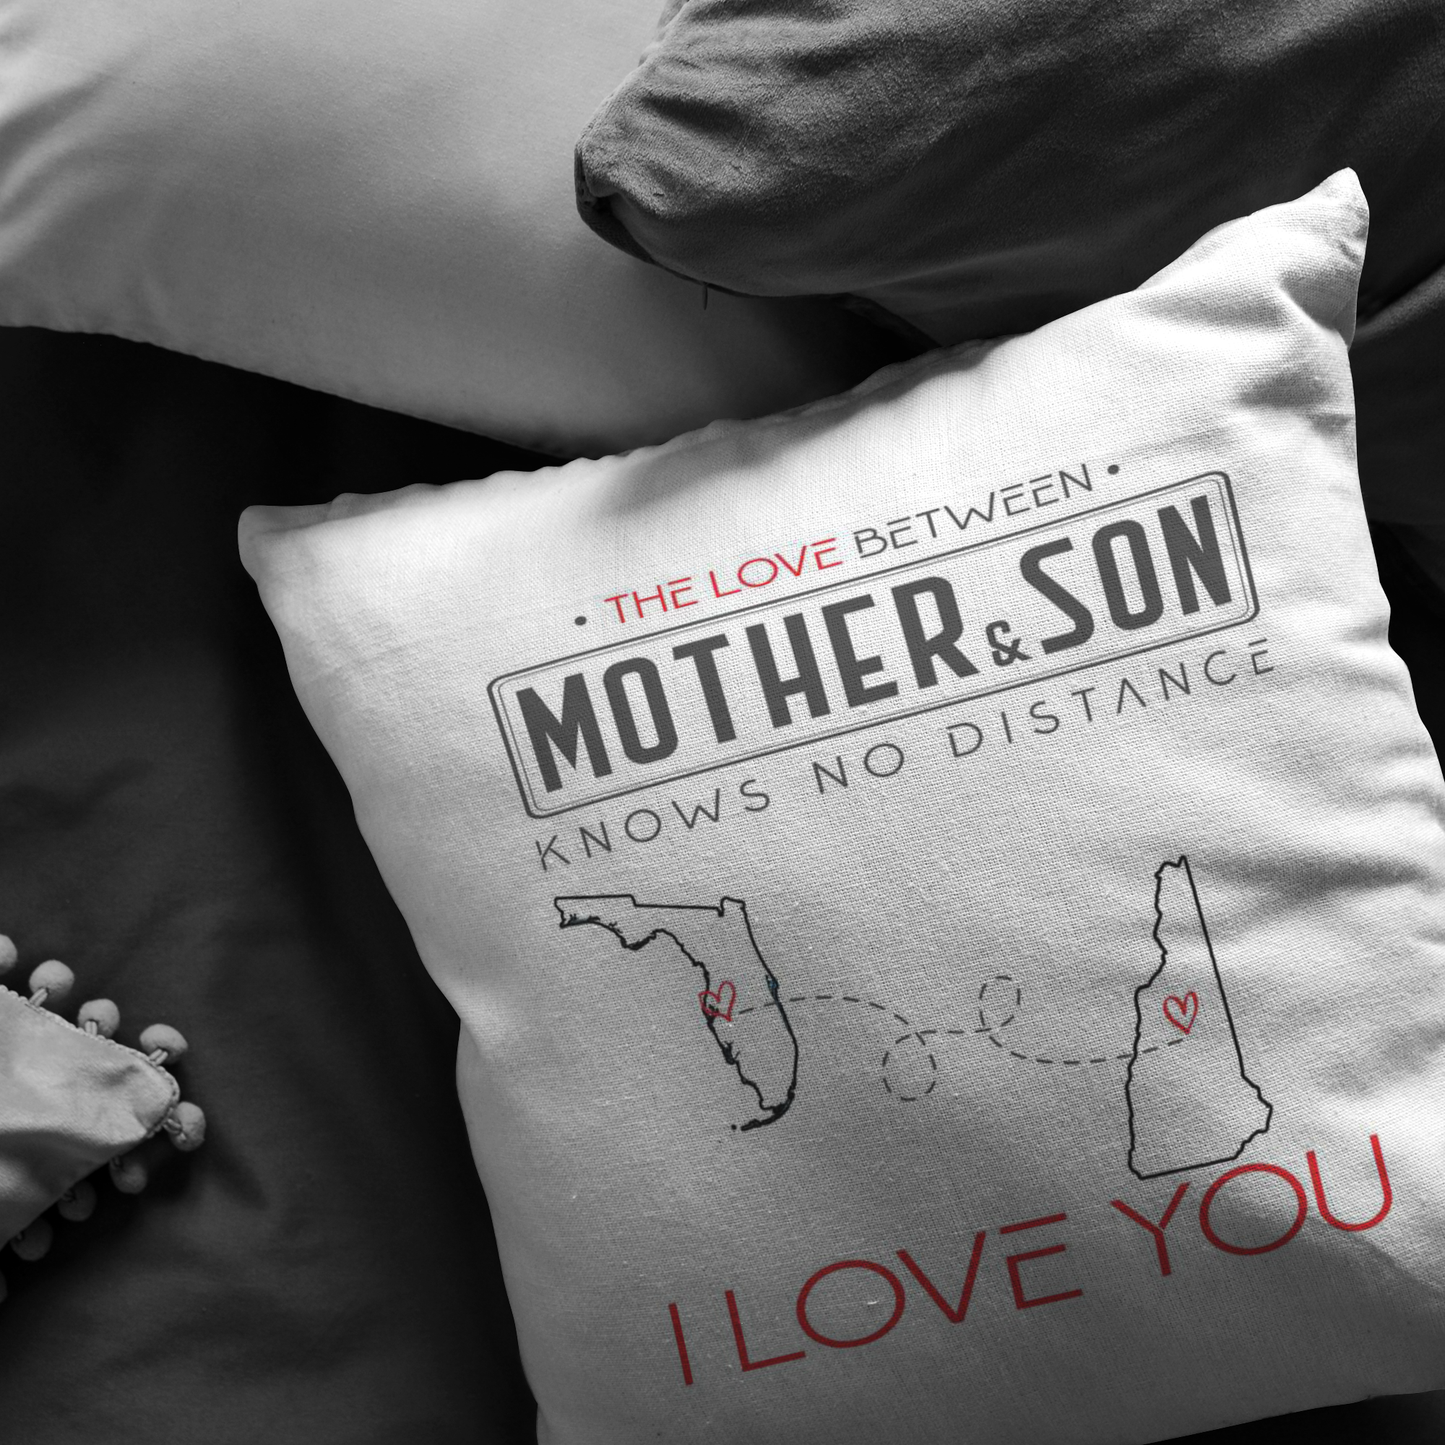 ND-pl20419744-sp-15913 - Long Distance Mom - The Love Between Mother & Son Knows No D